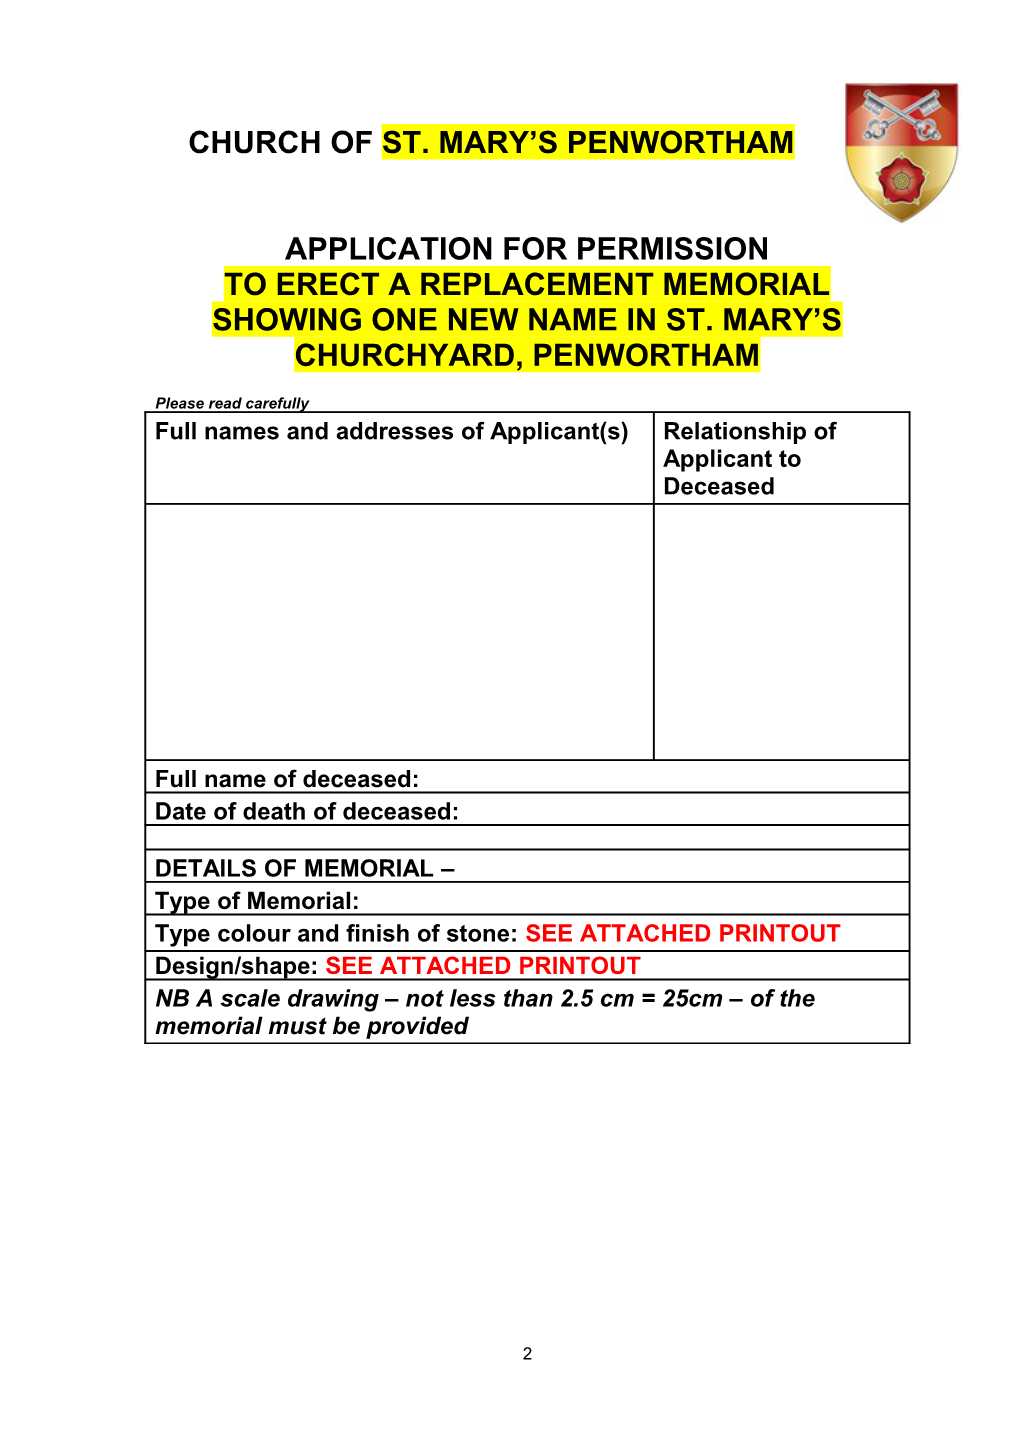 Application for Permission